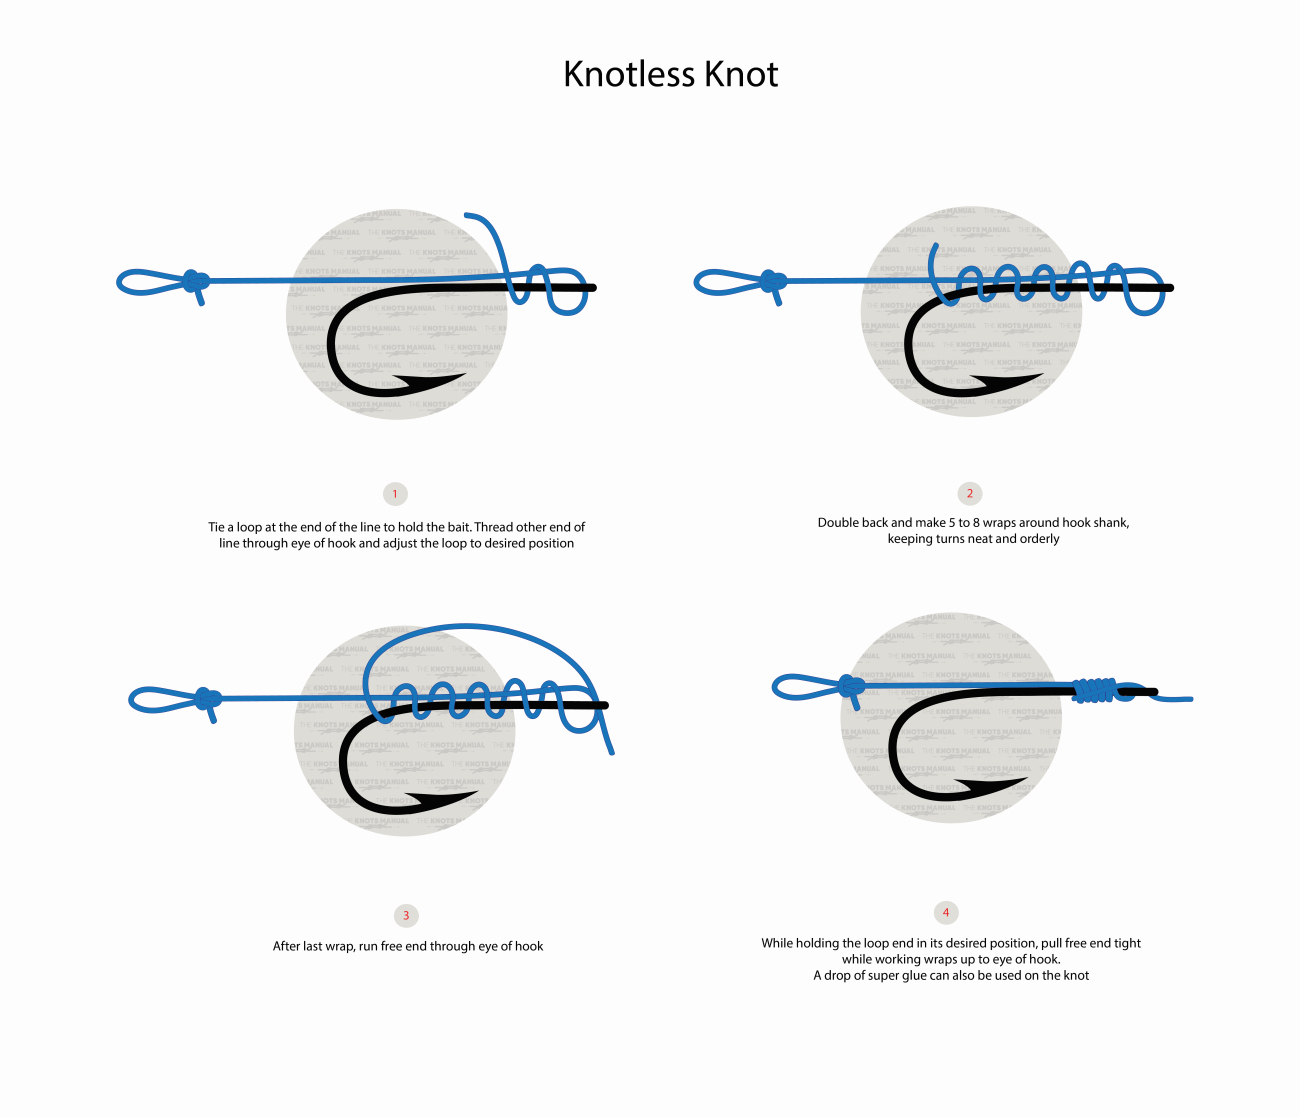 Knotless Knot